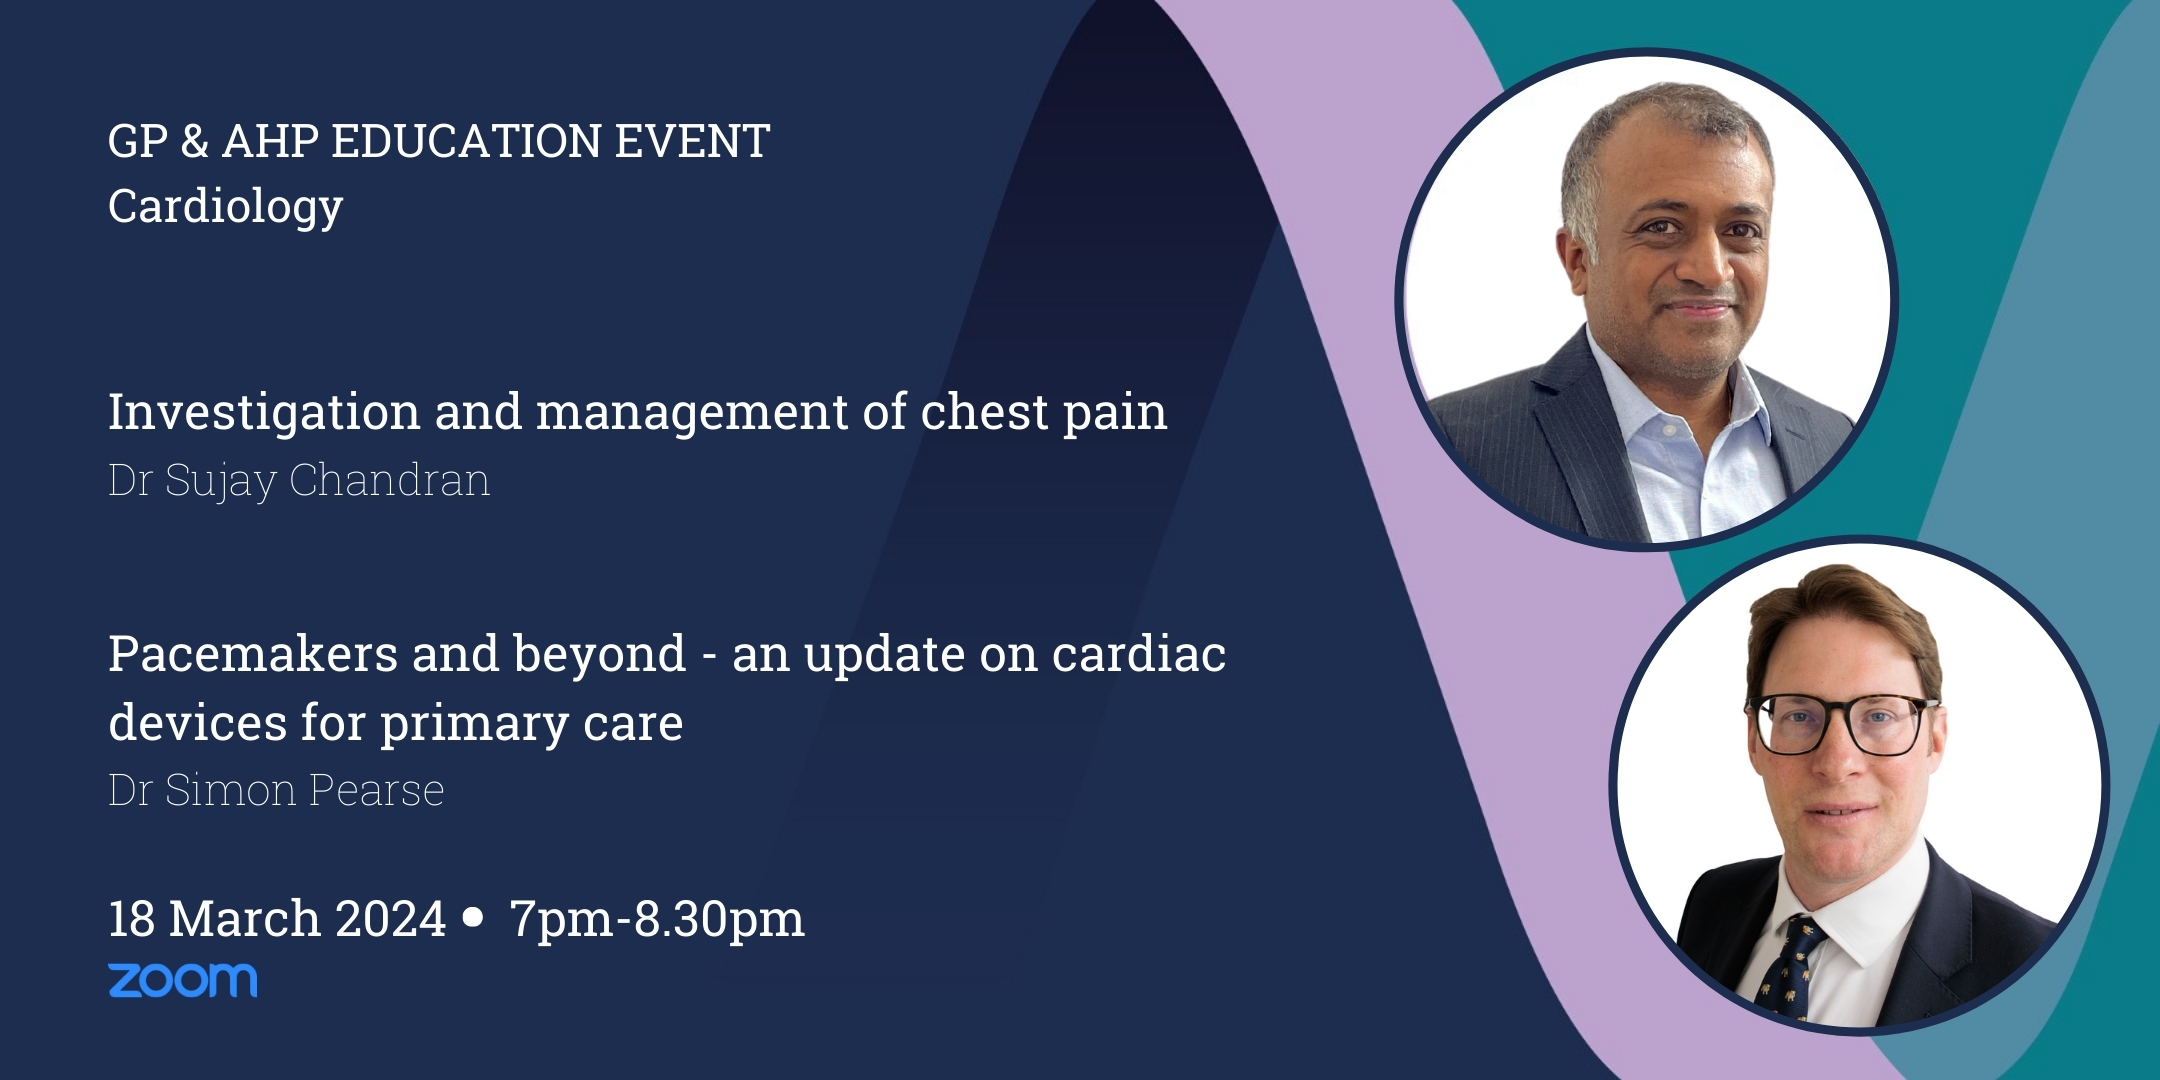 https://www.eventbrite.co.uk/e/gp-ahp-educational-lecture-via-zoom-cardiology-tickets-851407832747?aff=B2BCardiology24Website